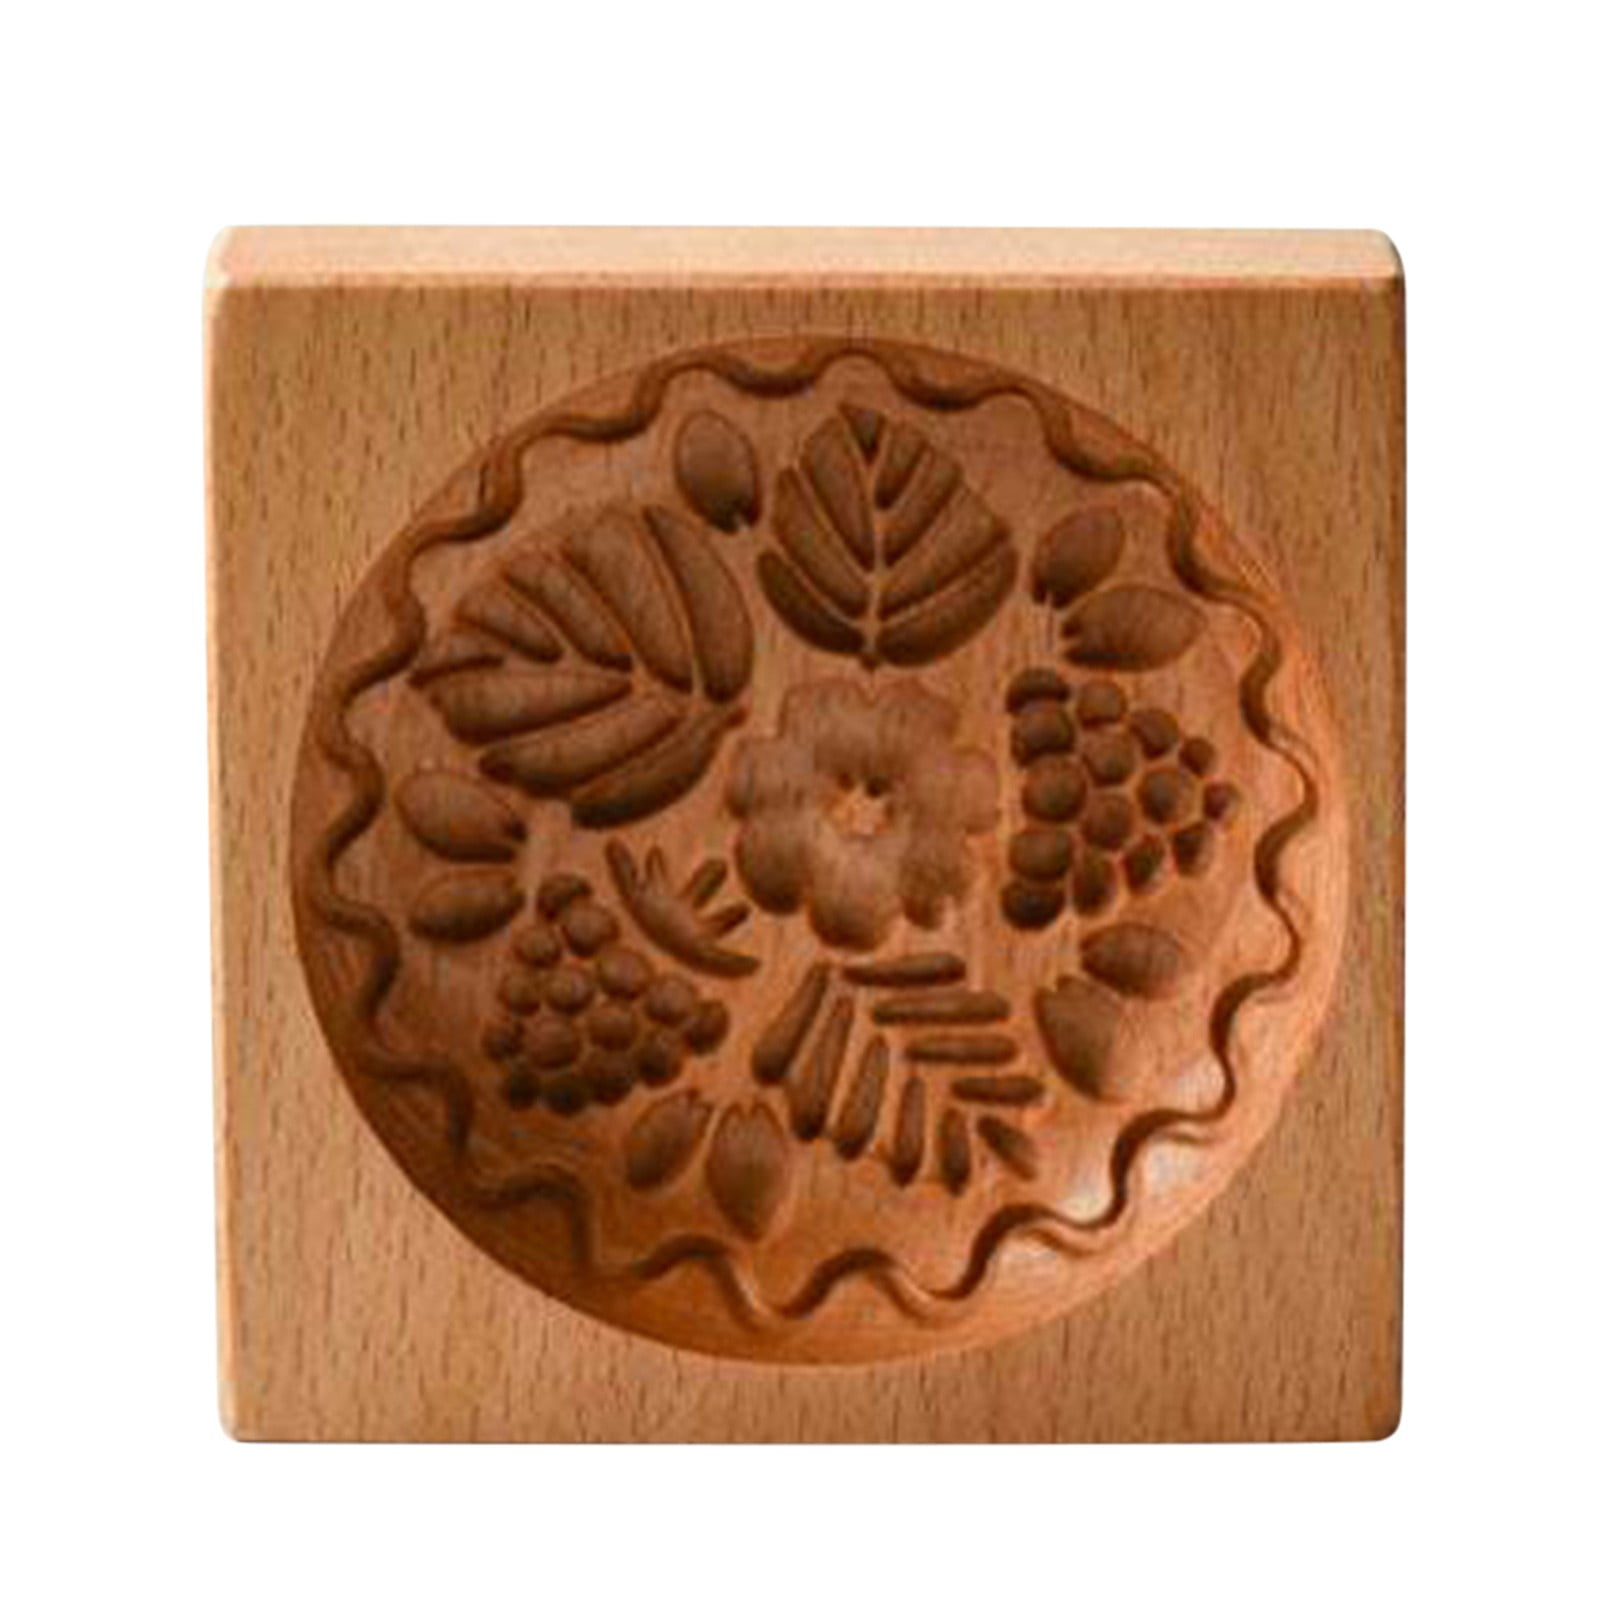 Folzery Raspberry Shortbread Mold-Carved Wood Gingerbread Biscuits Shortbread Mold, Adult Unisex, Size: One size, Brown